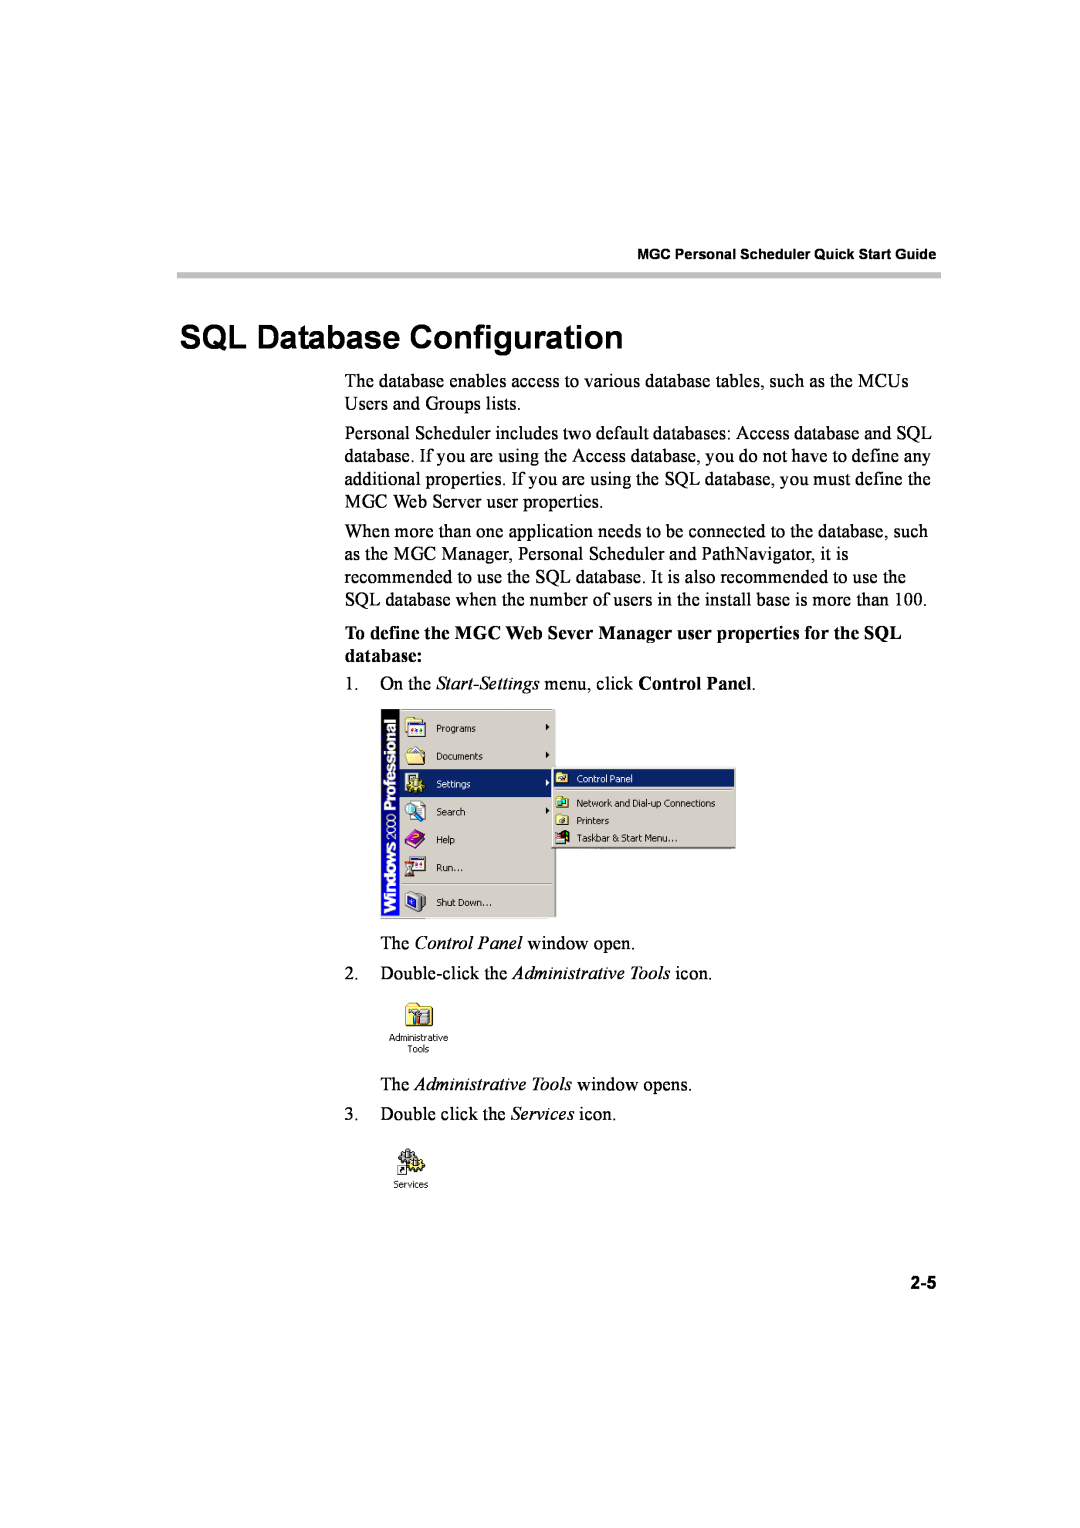 Polycom 8 quick start SQL Database Configuration, The Administrative Tools window opens 